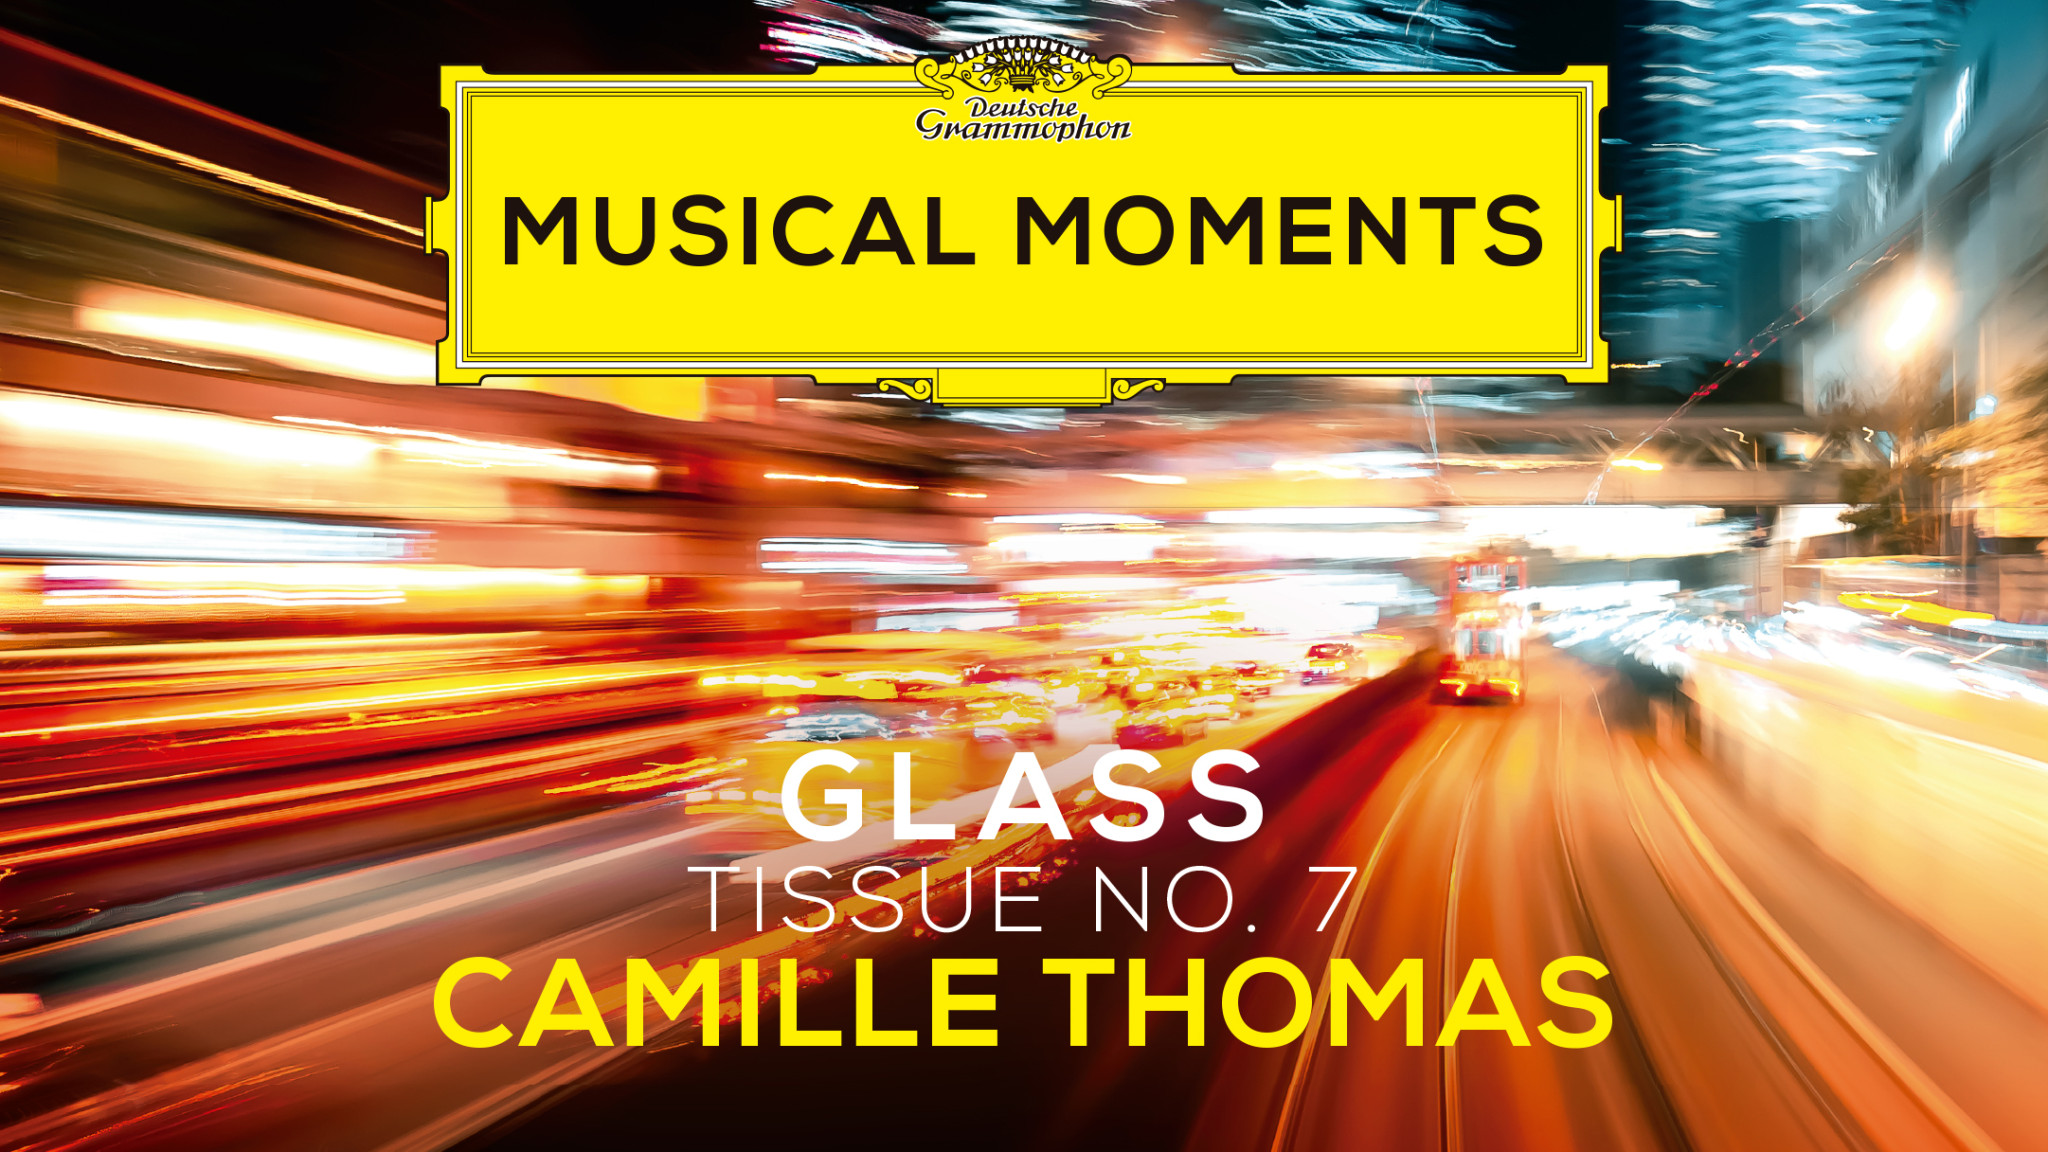 Camille Thomas Musical Moments Website